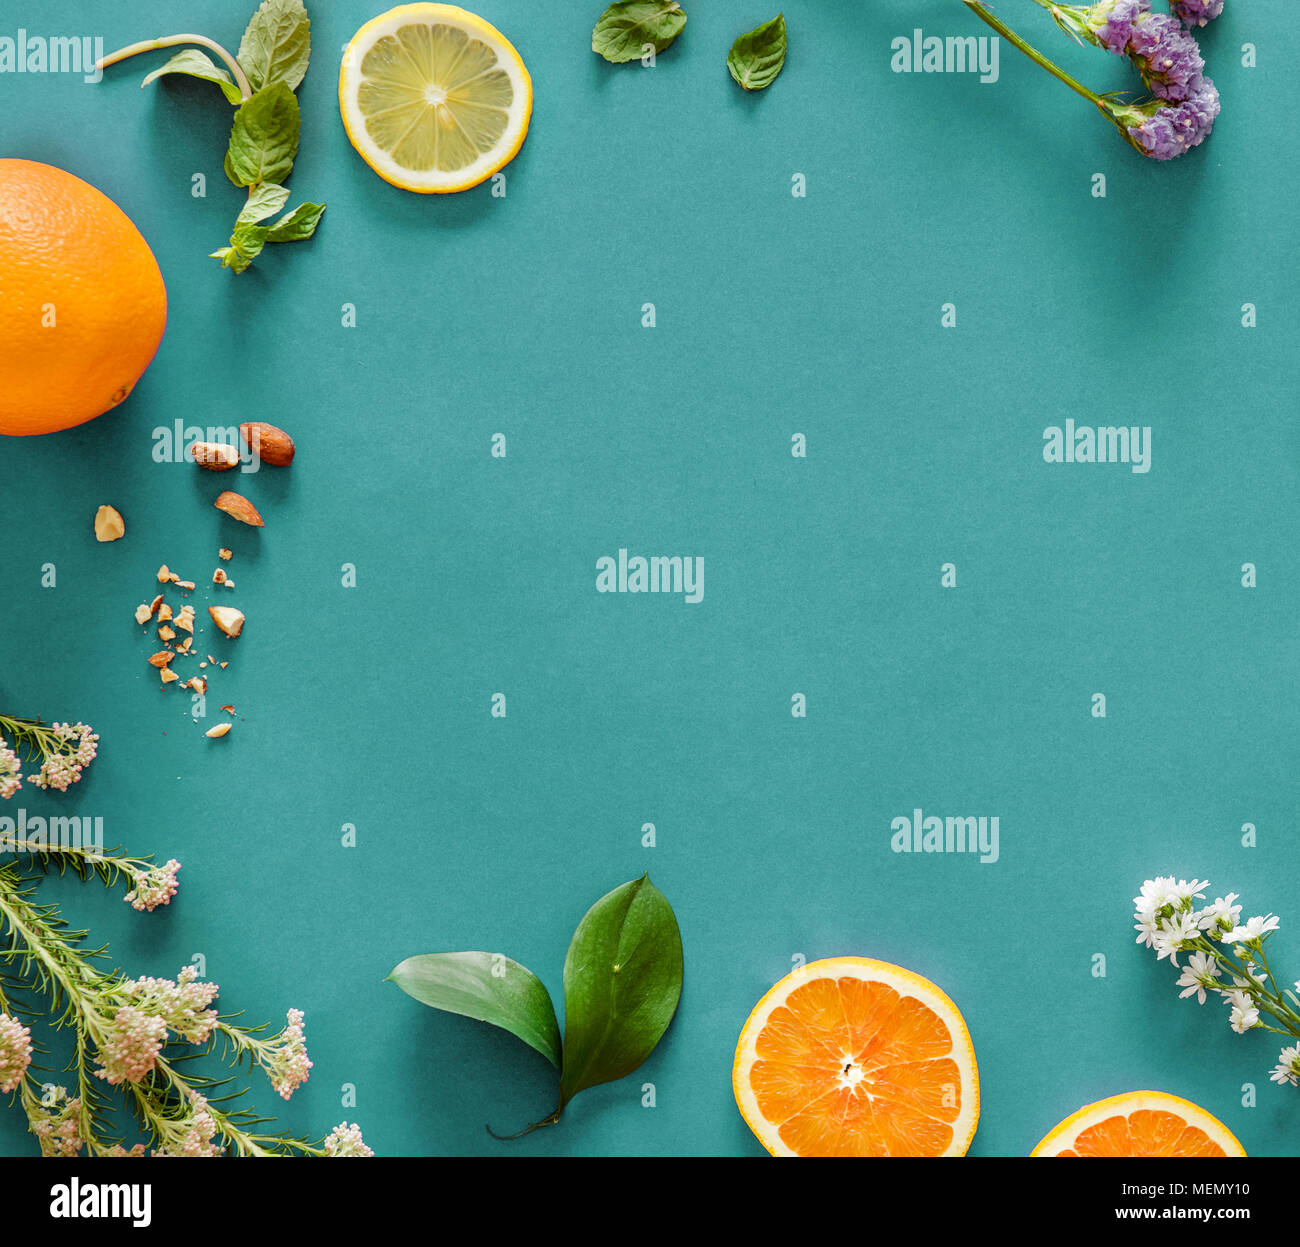 Assortment of tropical citrus fruits background Stock Photo